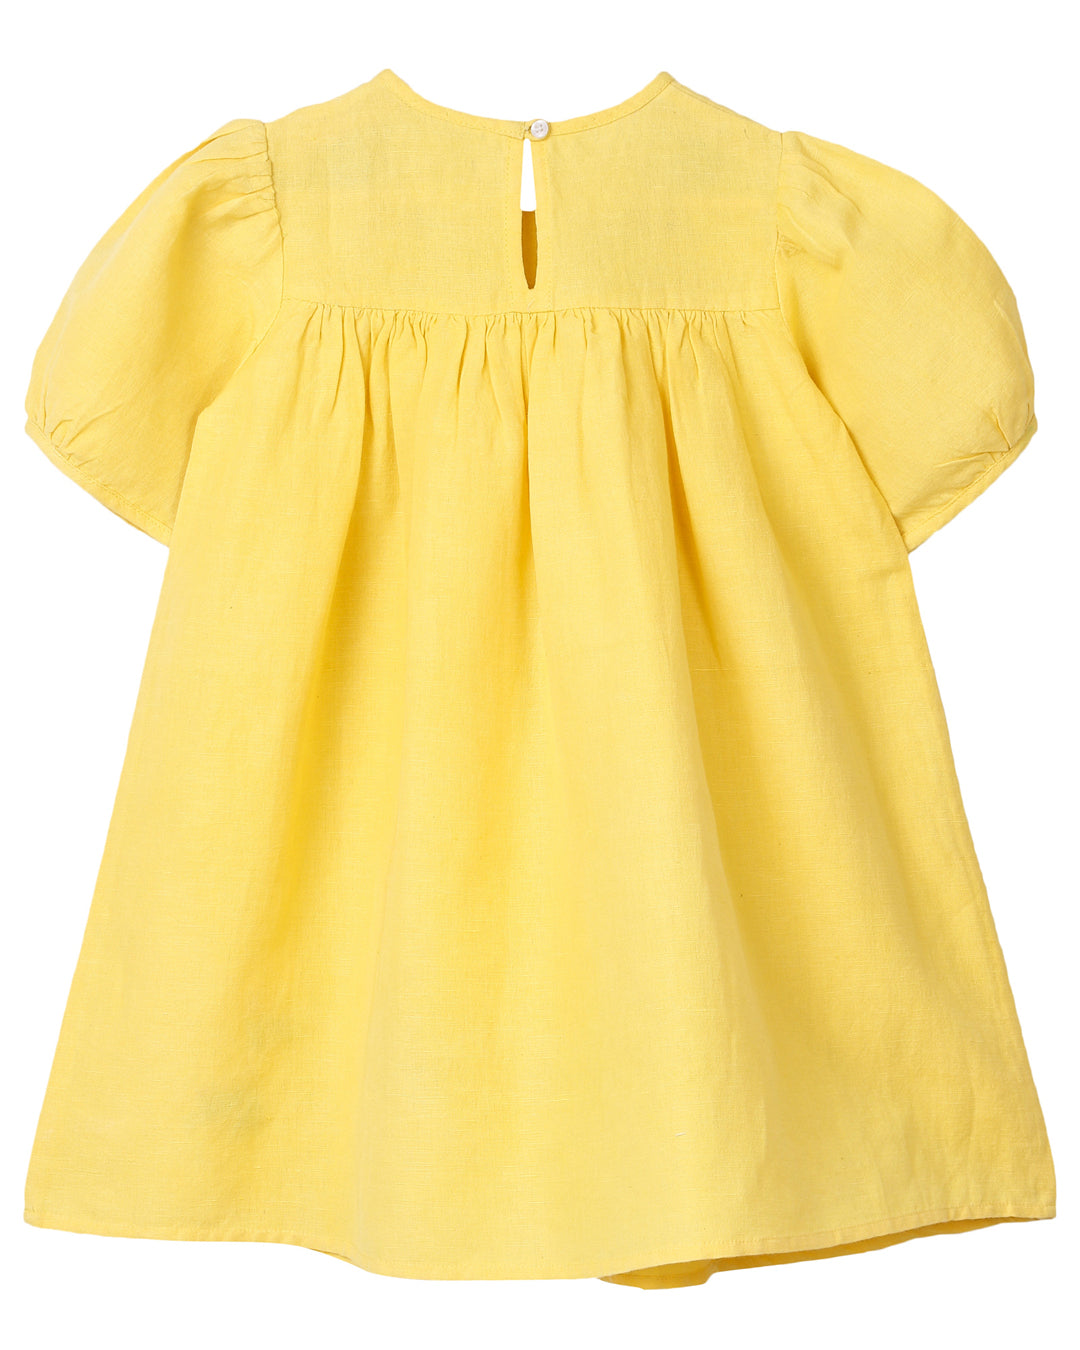 Linen Dress In A Vibrant Yellow